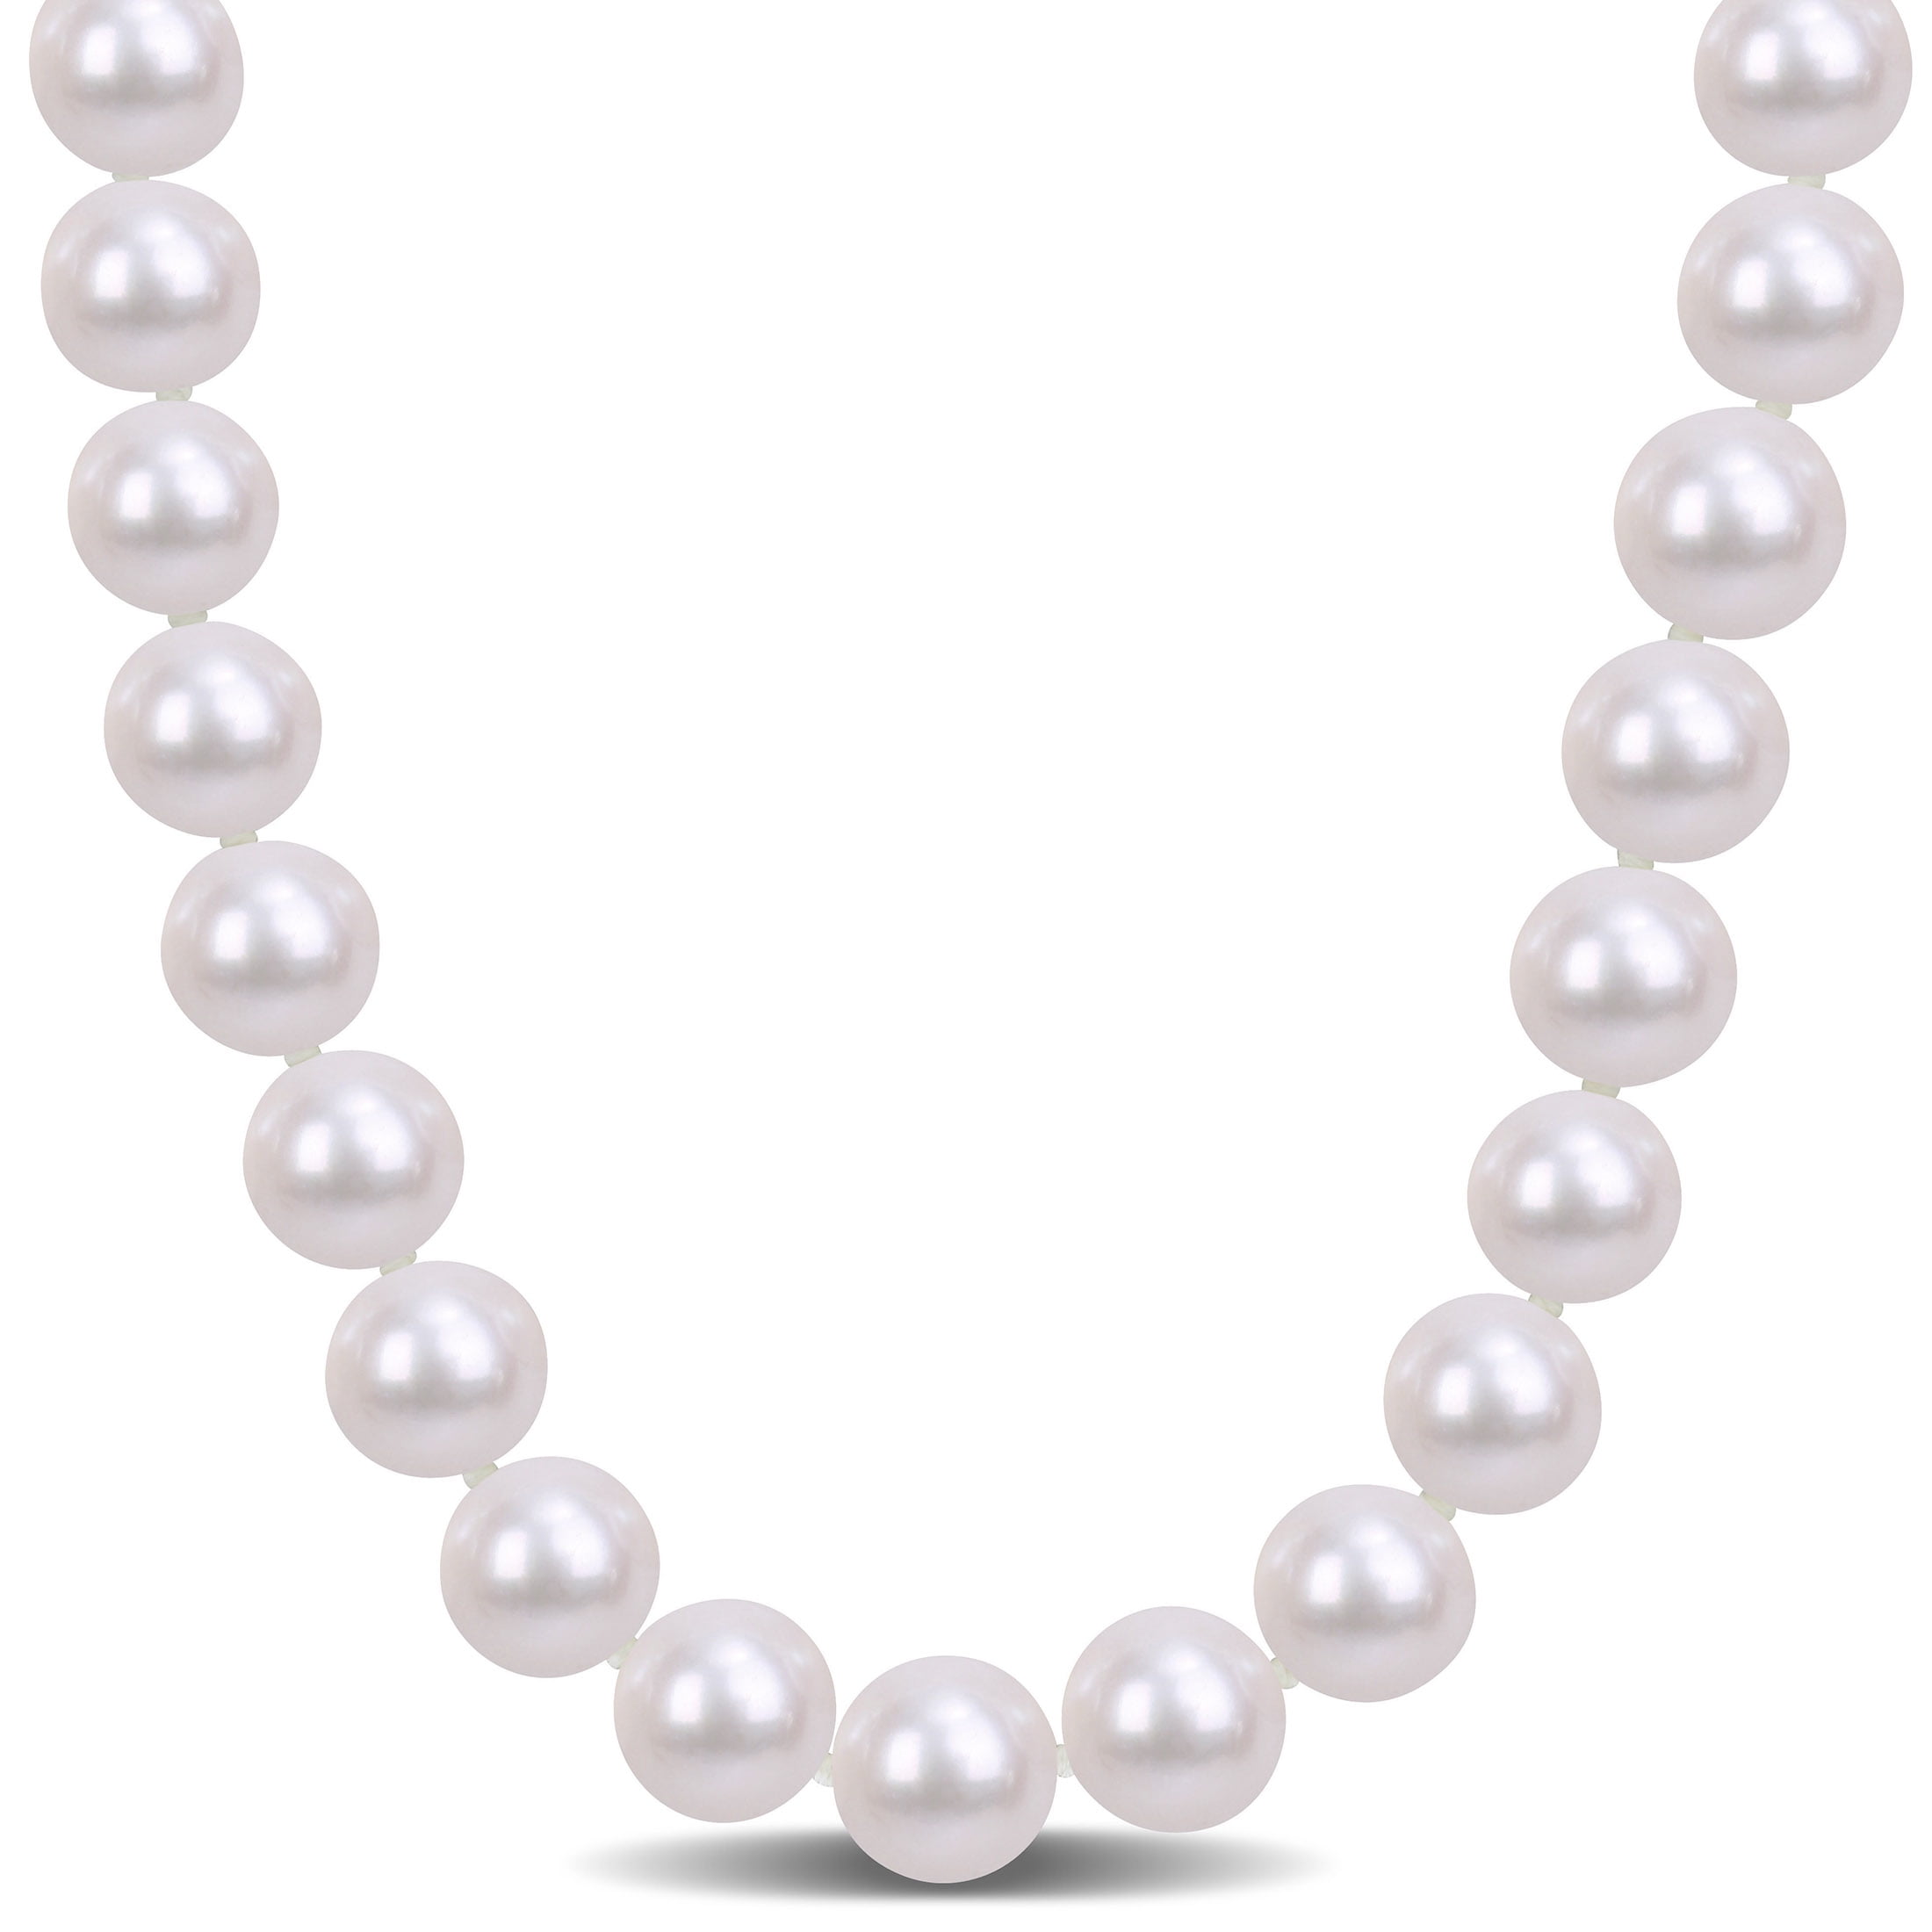 Genuine White Fresh Water Pearls Loose Strand 17 Inches Long 6.5 MM 